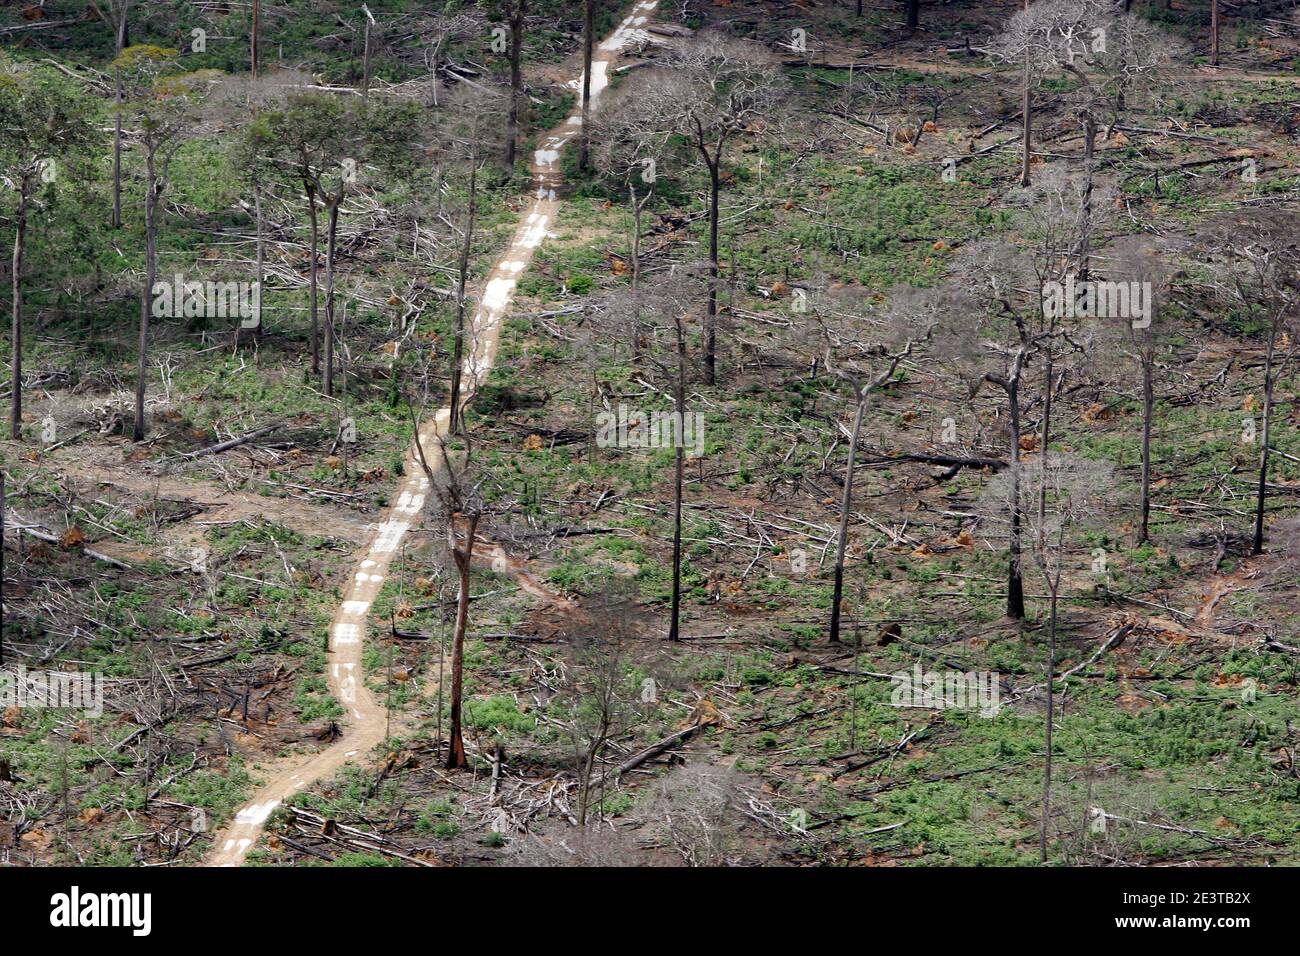 Amazon rainforest clearance for agriculture, near Santarem - deforestation for the agribusiness - economic development creating ecological unbalance. Opening of a road where before there was a forest. Stock Photo